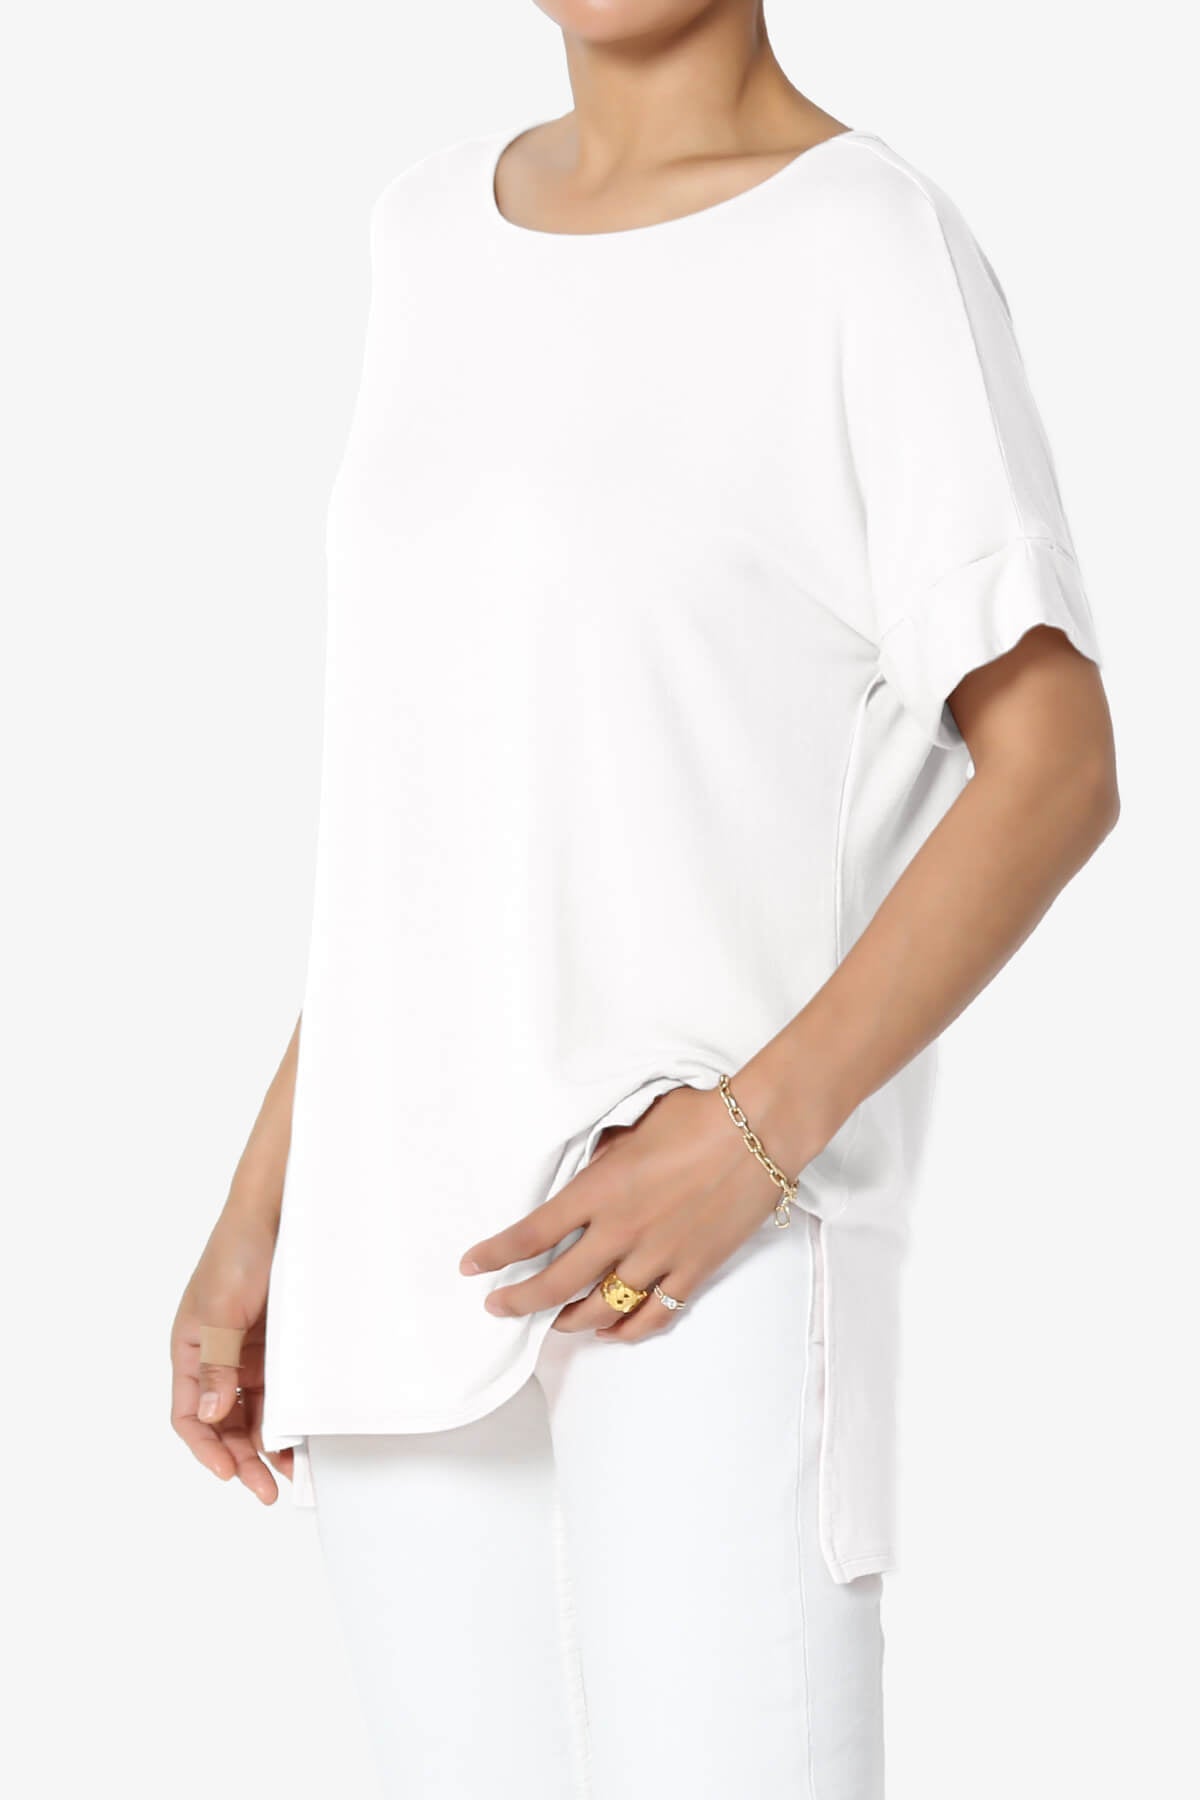 Load image into Gallery viewer, Poloma Modal Jersey Boat Neck Top IVORY_3
